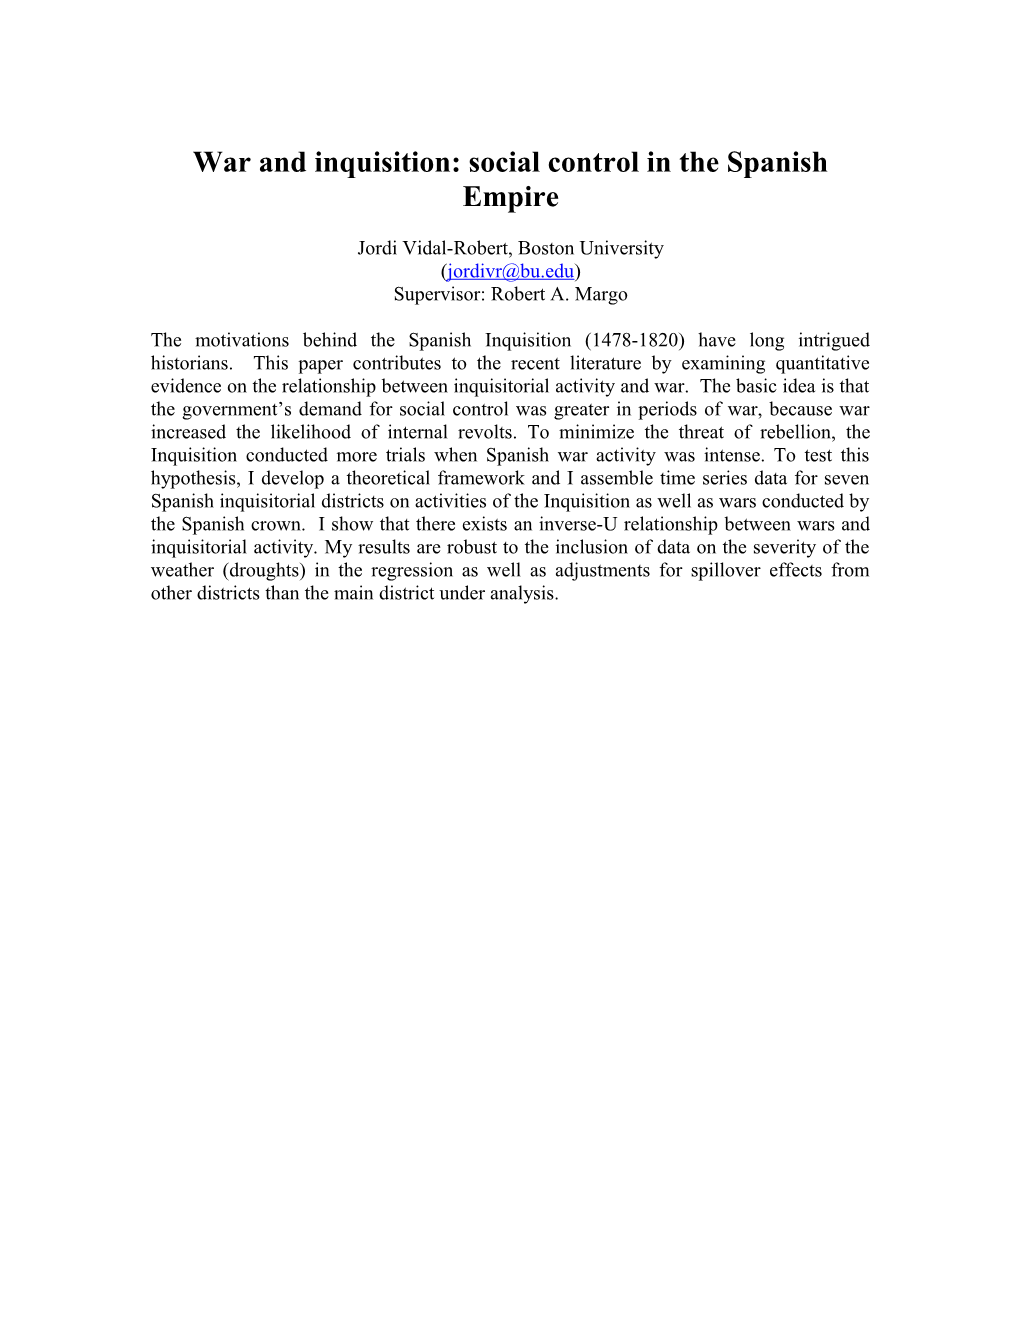 War and Inquisition: Social Control in the Spanish Empire